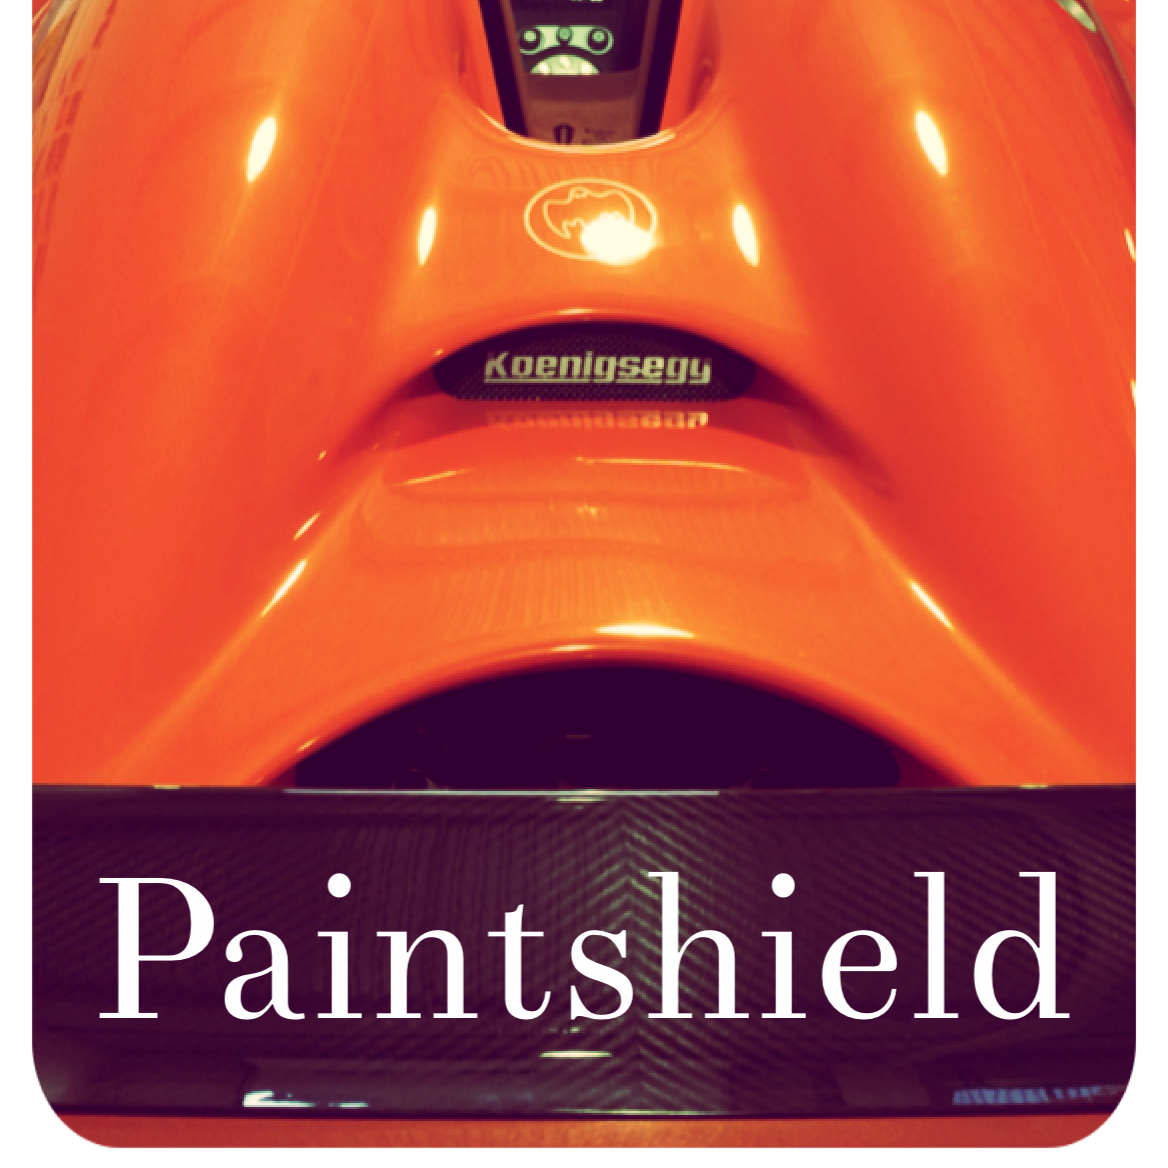 Paintshield Ltd (tm)
Paintshield Paint Protection Kits Will Prevent Your vehicle from suffering stonechips minor scuffs scratches and abrasions